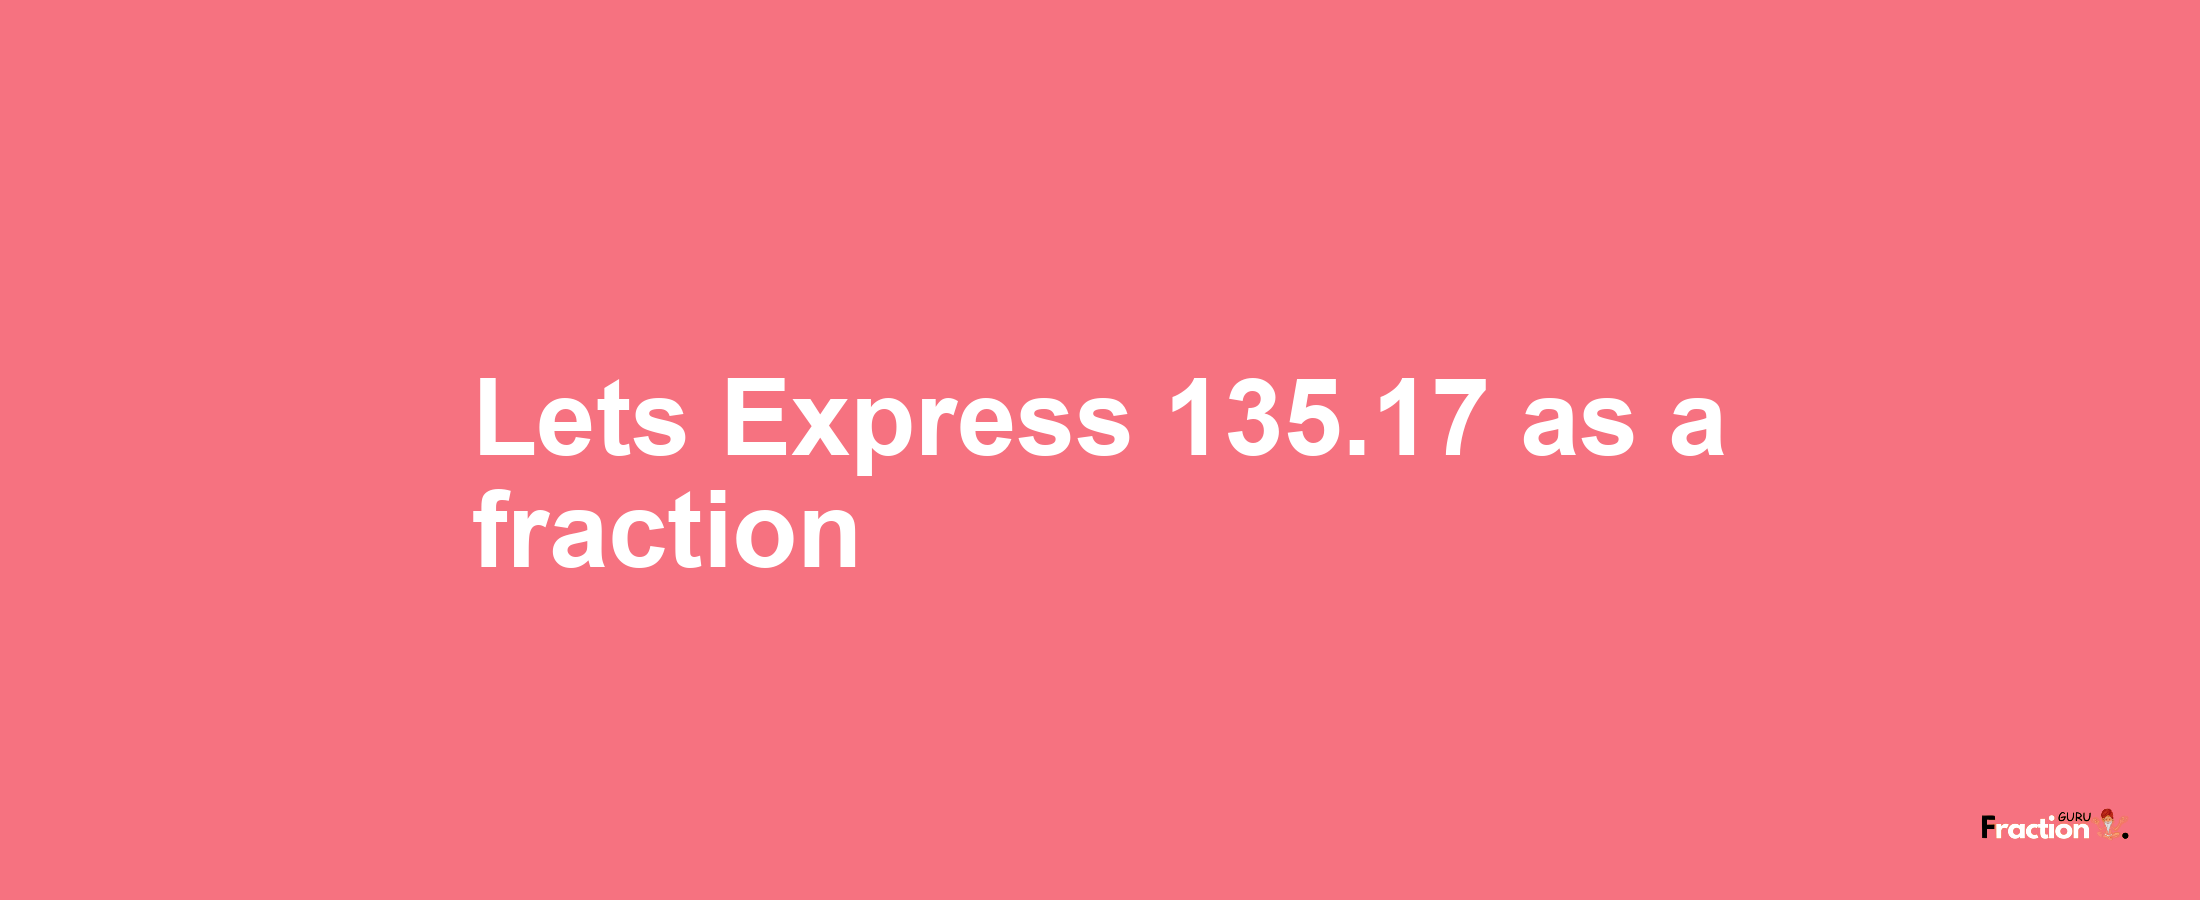 Lets Express 135.17 as afraction